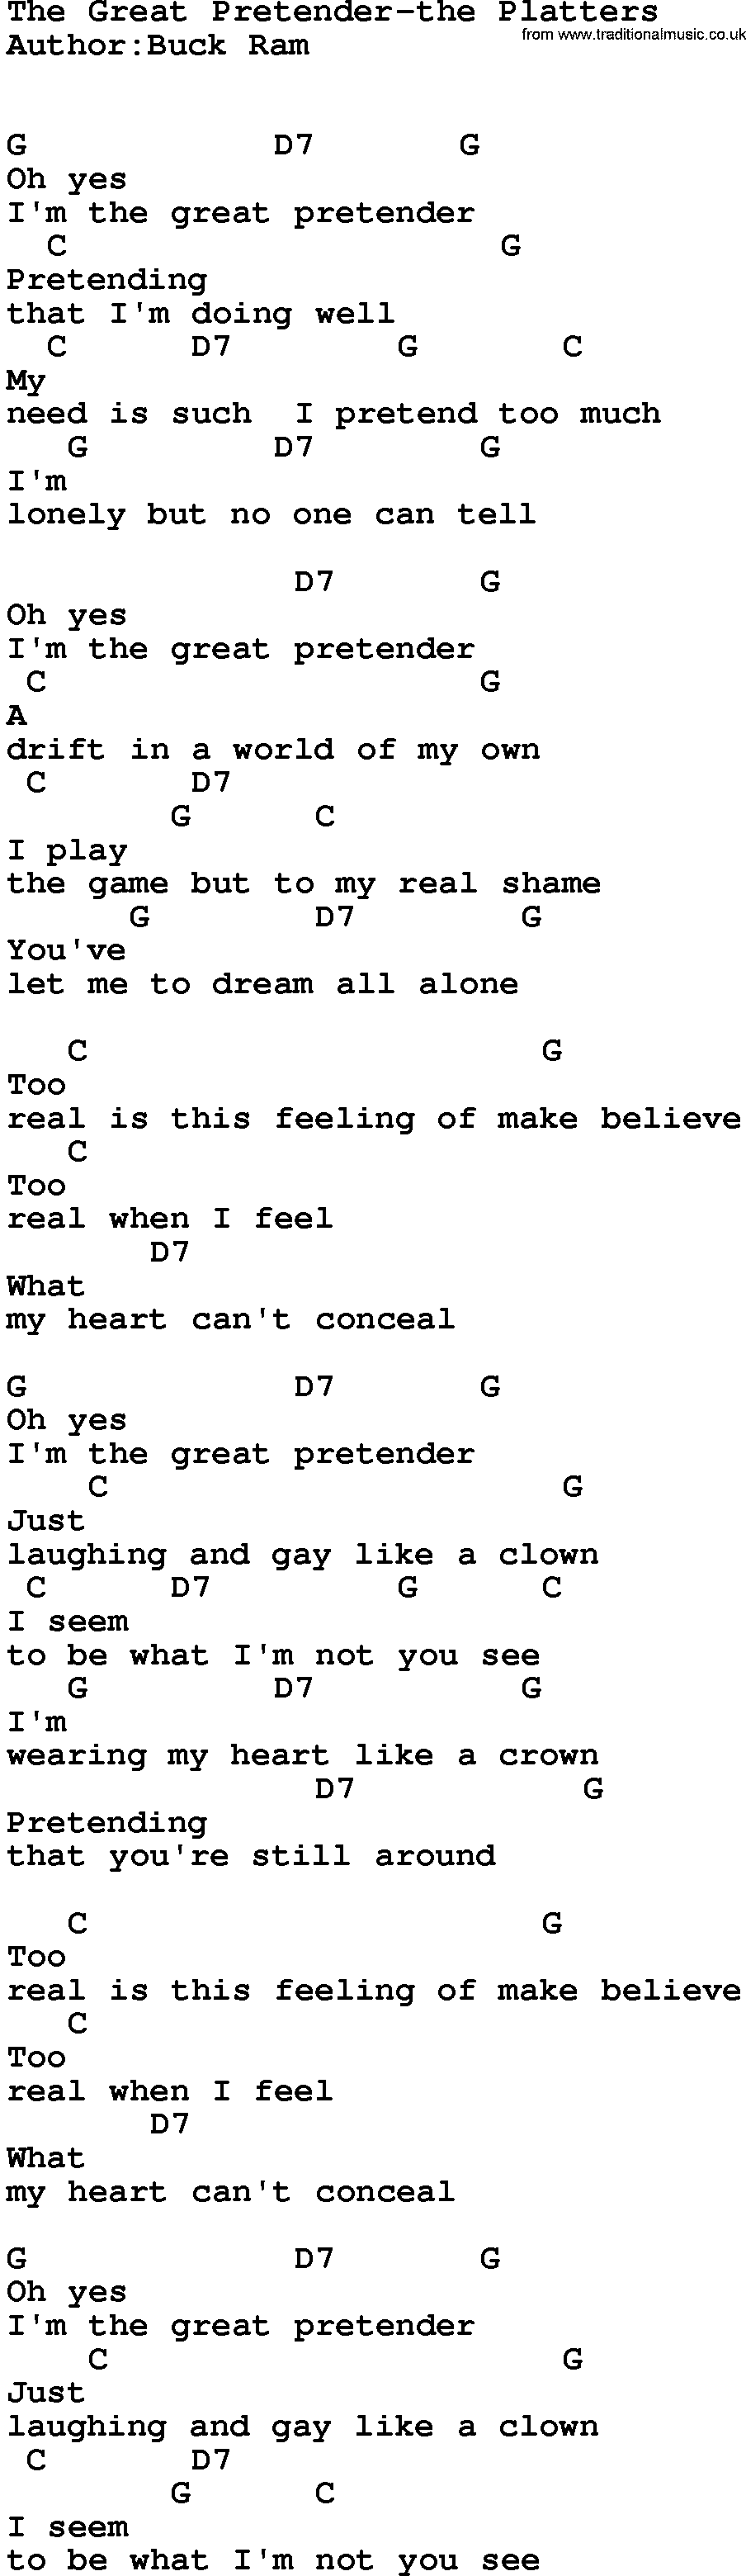 Country music song: The Great Pretender-The Platters lyrics and chords